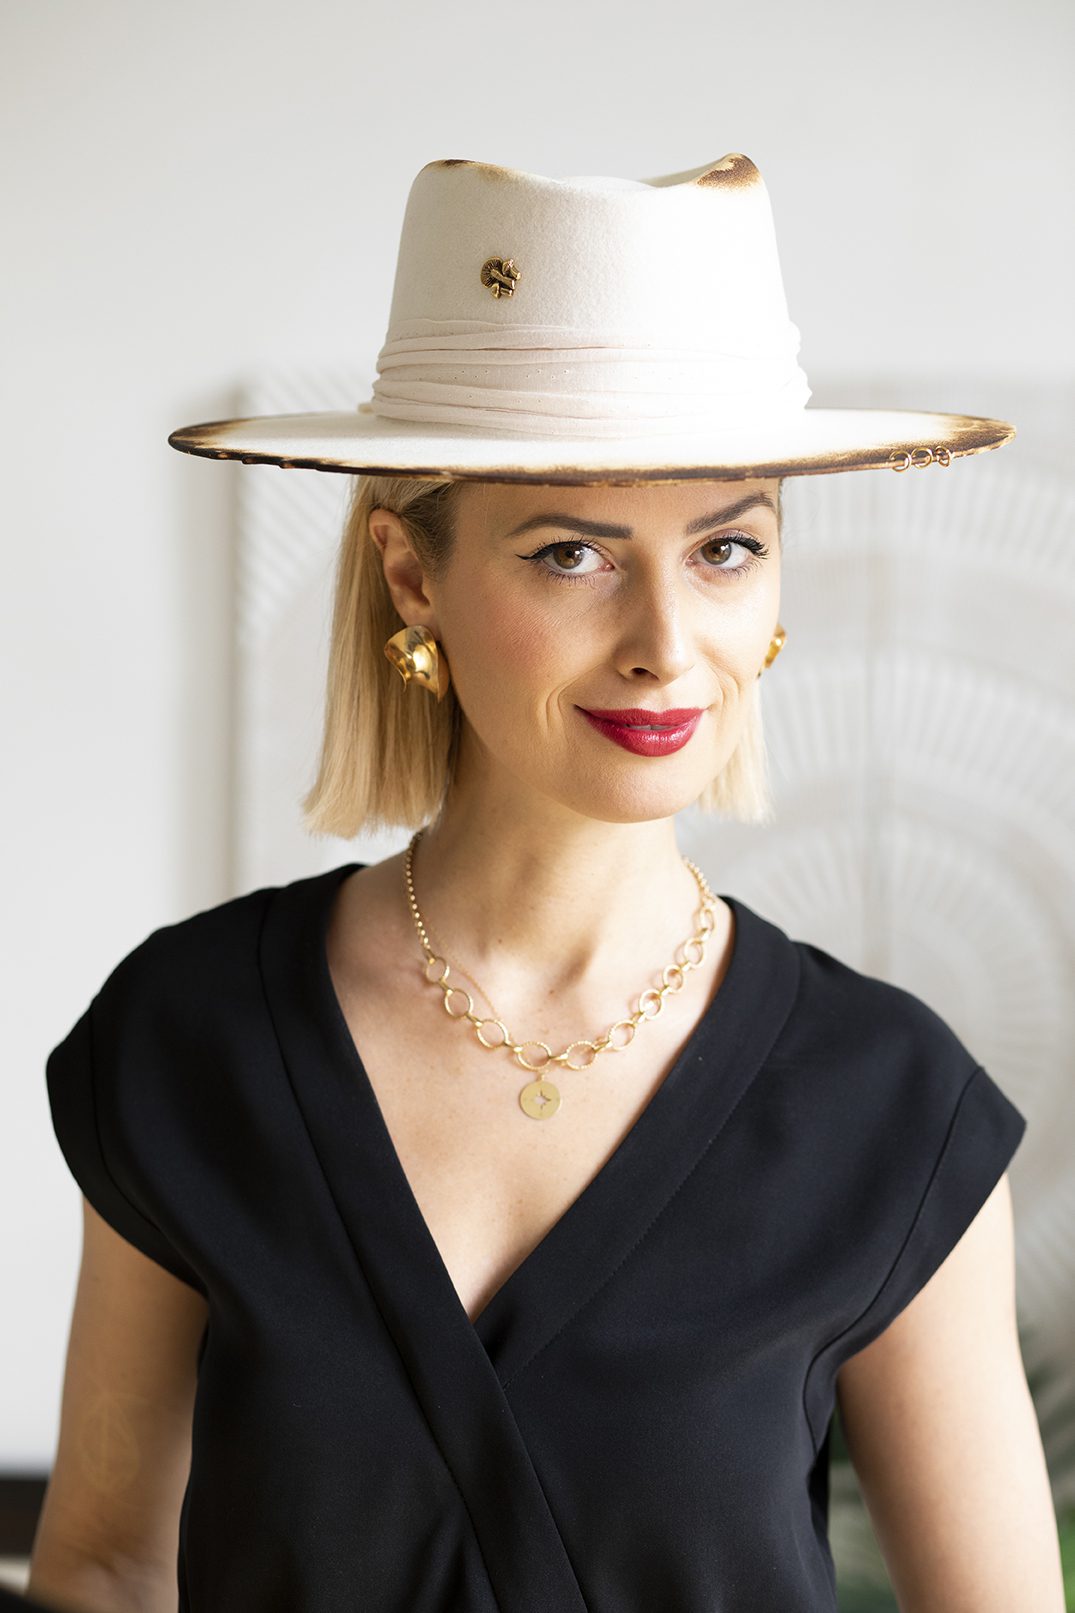 Dorota Stanczyk smiling and wearing beige hat